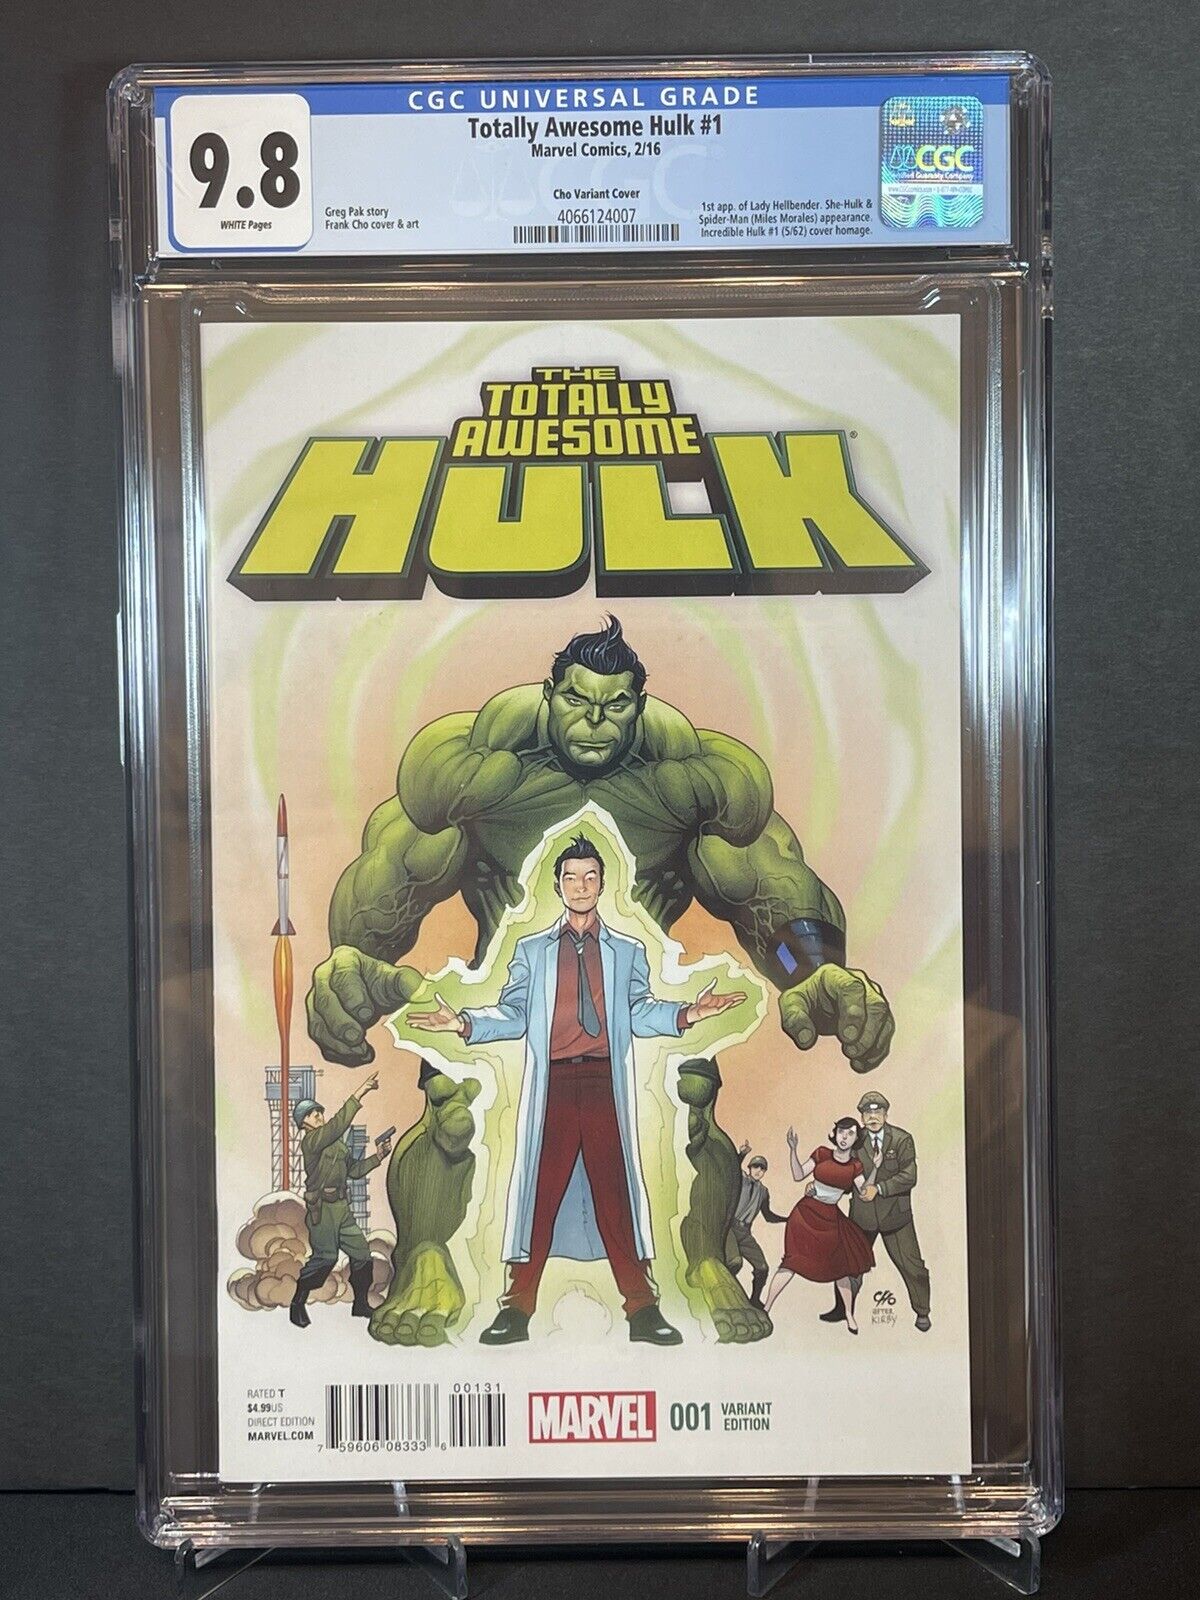 Marvel Comics Totally Awesome Hulk #1 Cho Variant Cover CGC 9.8 White Pages 2016